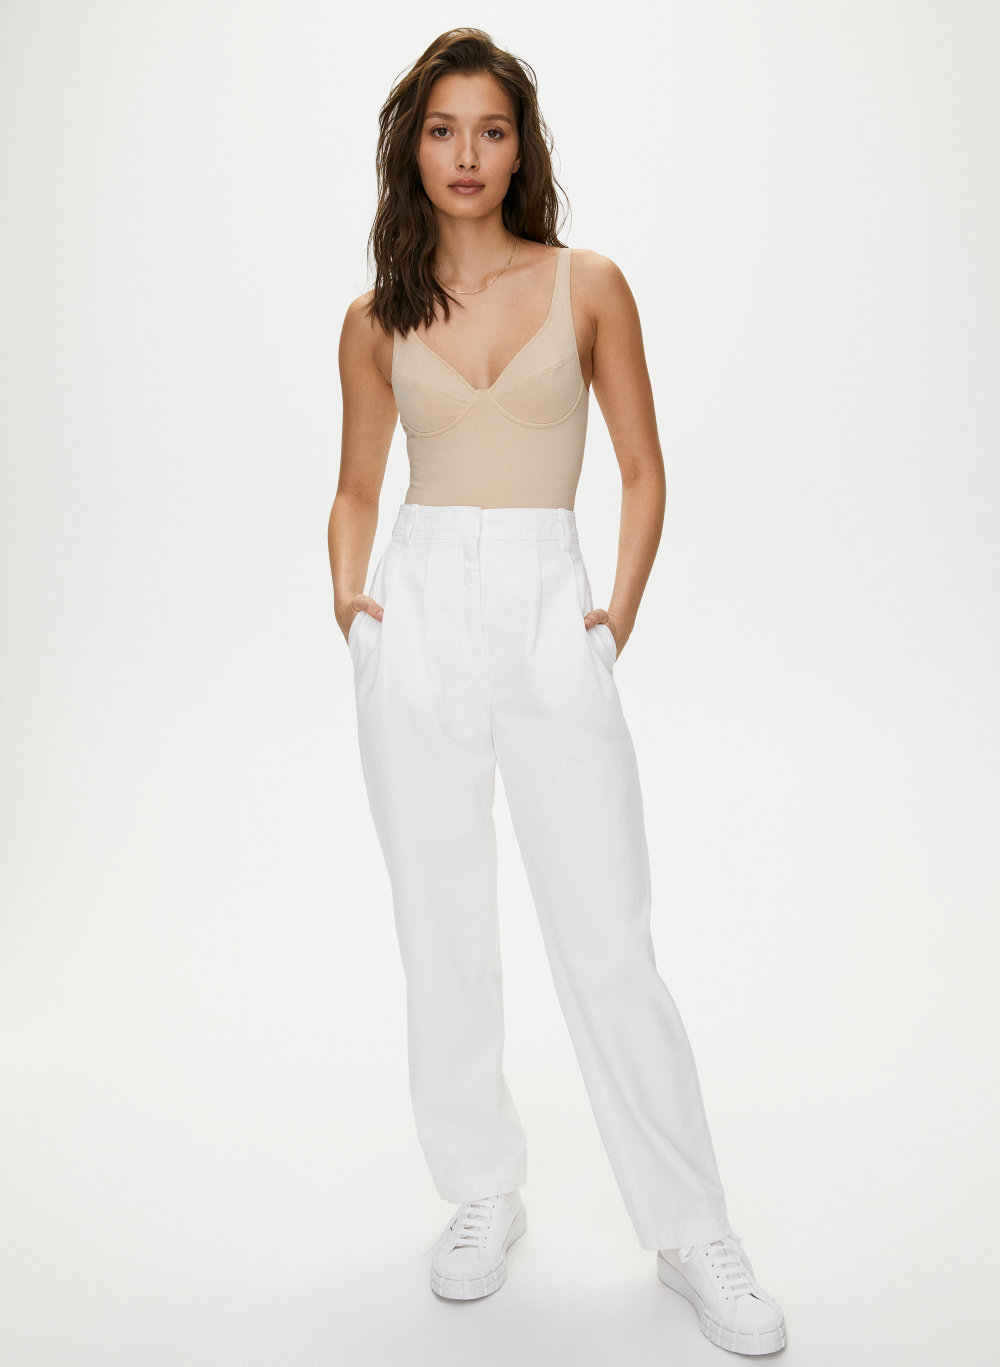 The Group by Babaton ANTARES PANT | Aritzia INTL